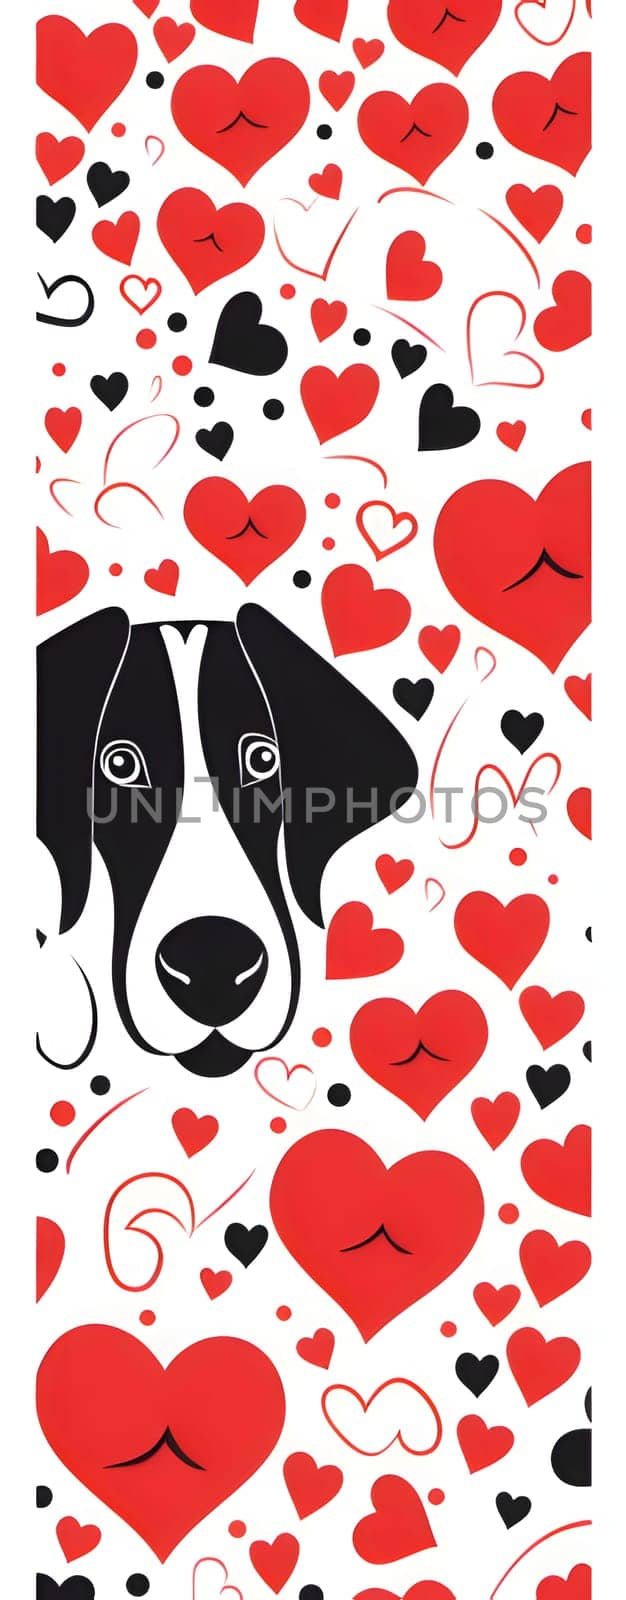 Red and Black hearts in the middle, dog's head, white background. Heart as a symbol of affection and love. The time of falling in love and love.